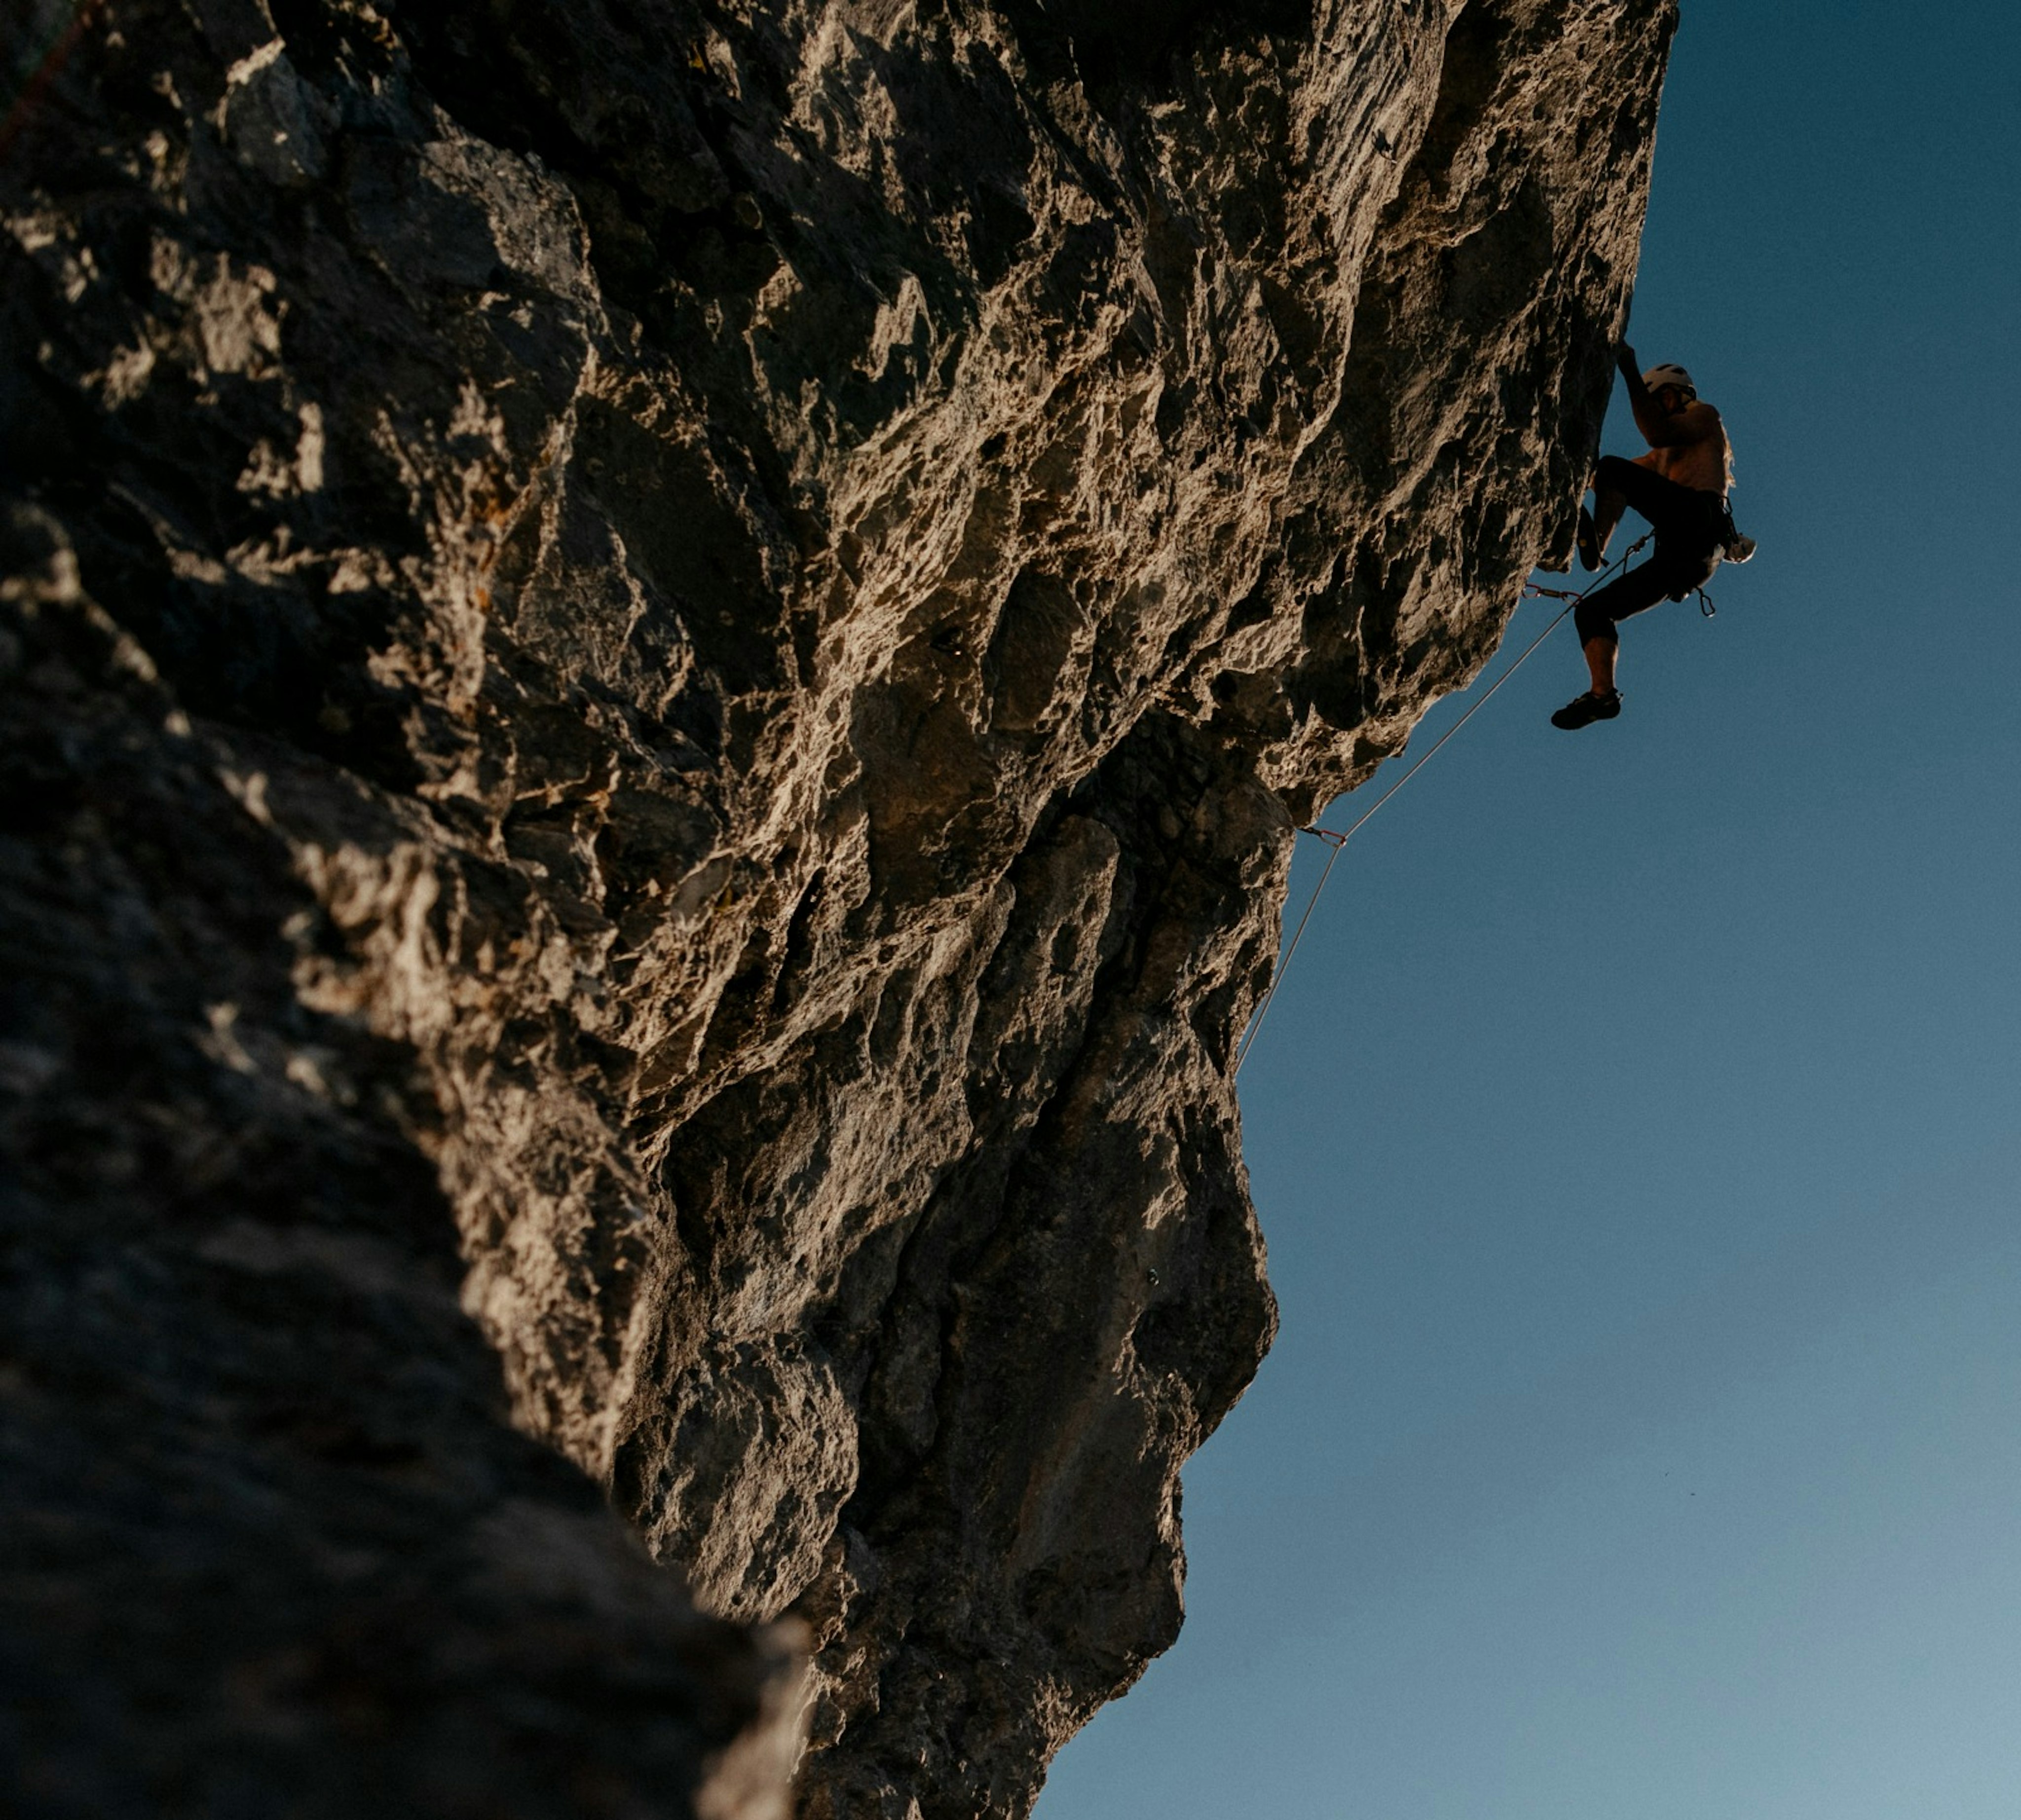 A climber in Mammut outfit